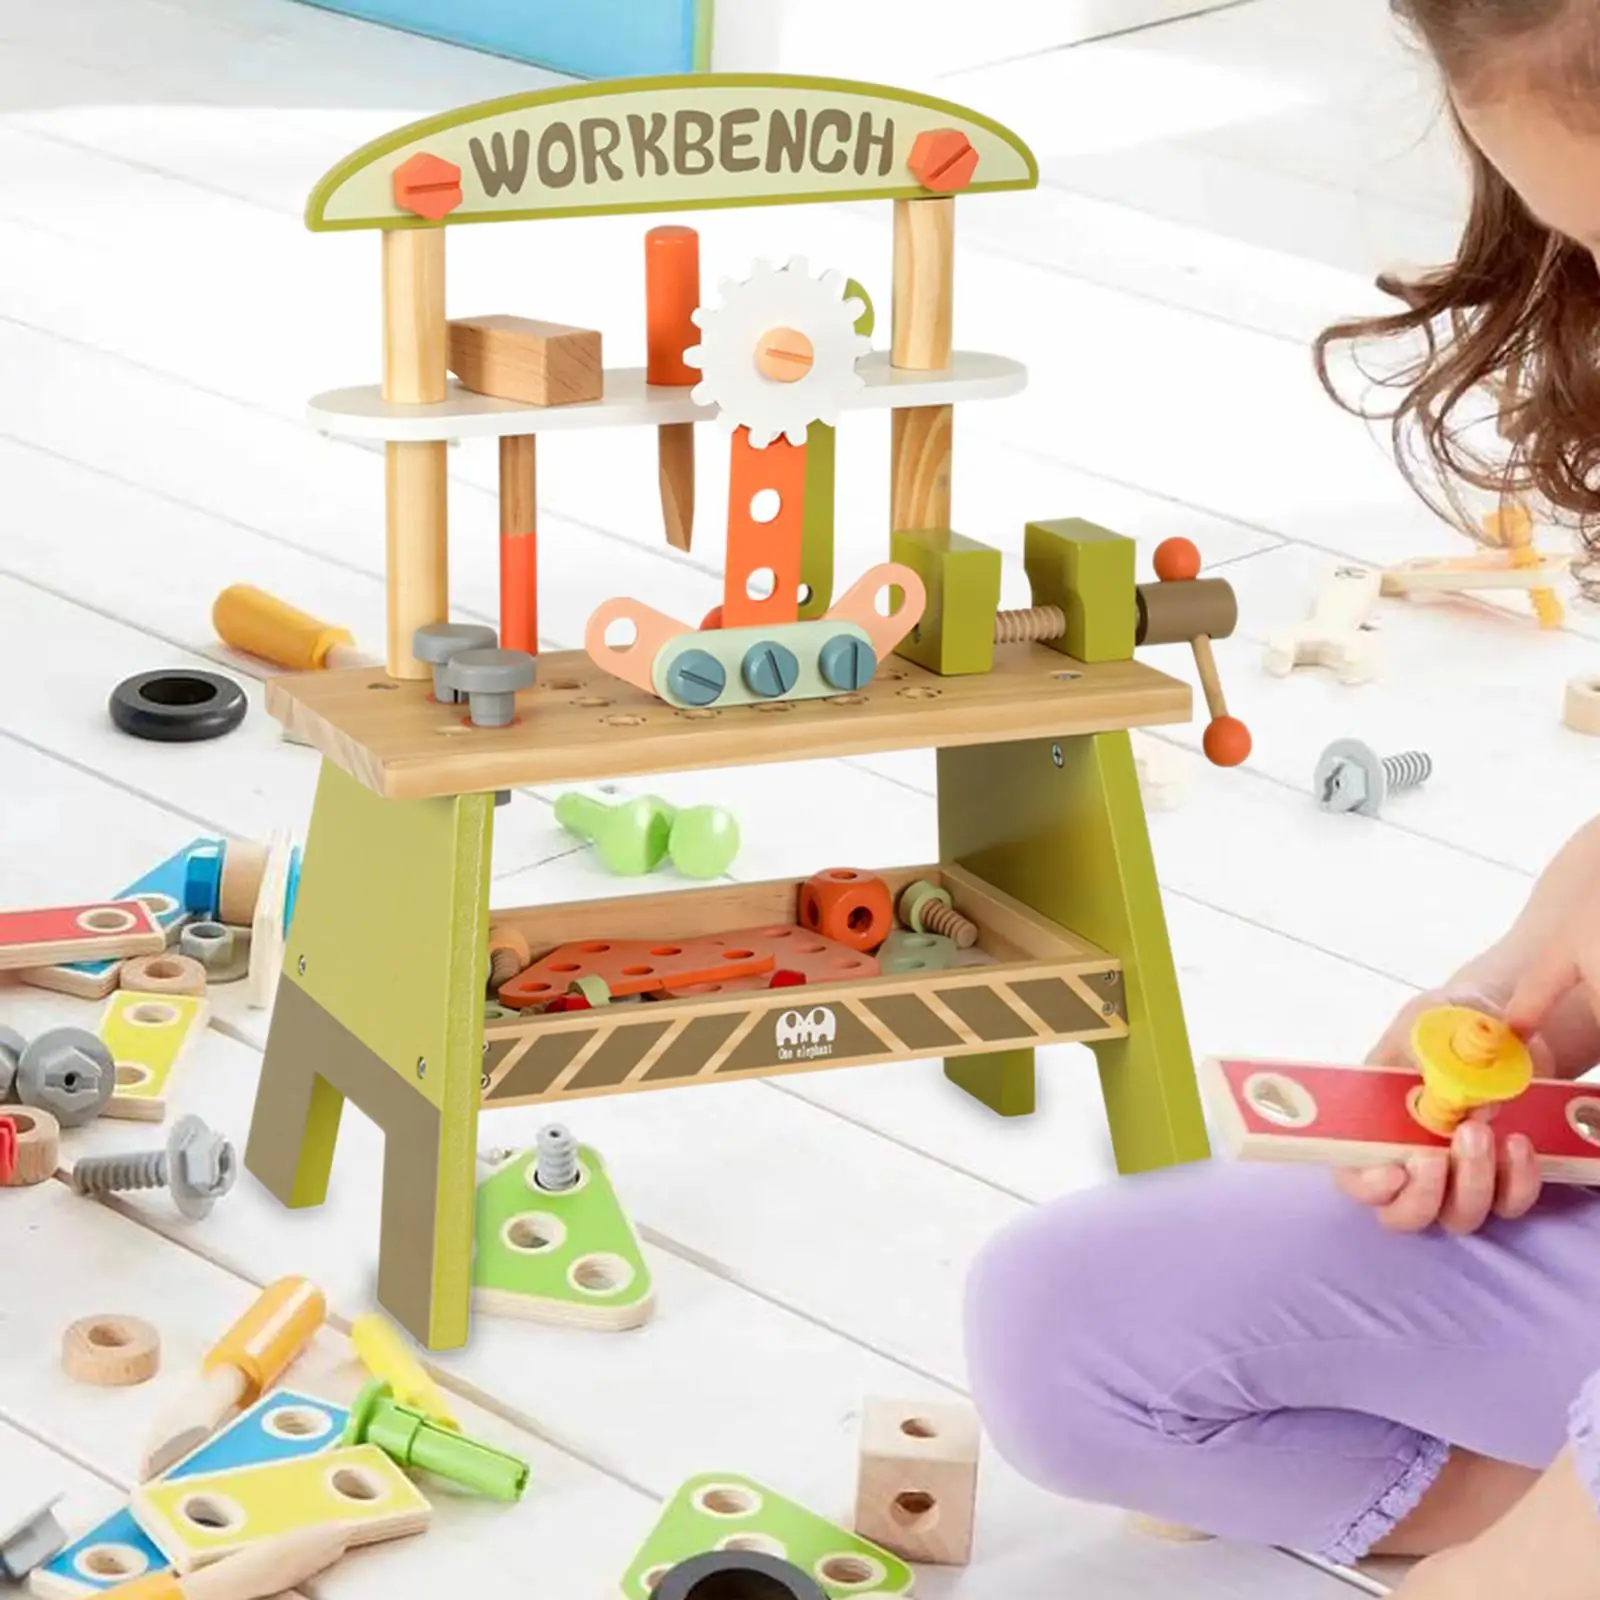 Pretend Play Construction Toy Kid`s Wooden Tool Bench Toy for Child Holiday Present 2 3 4 5 Years Old Christmas Gifts Girls Boys